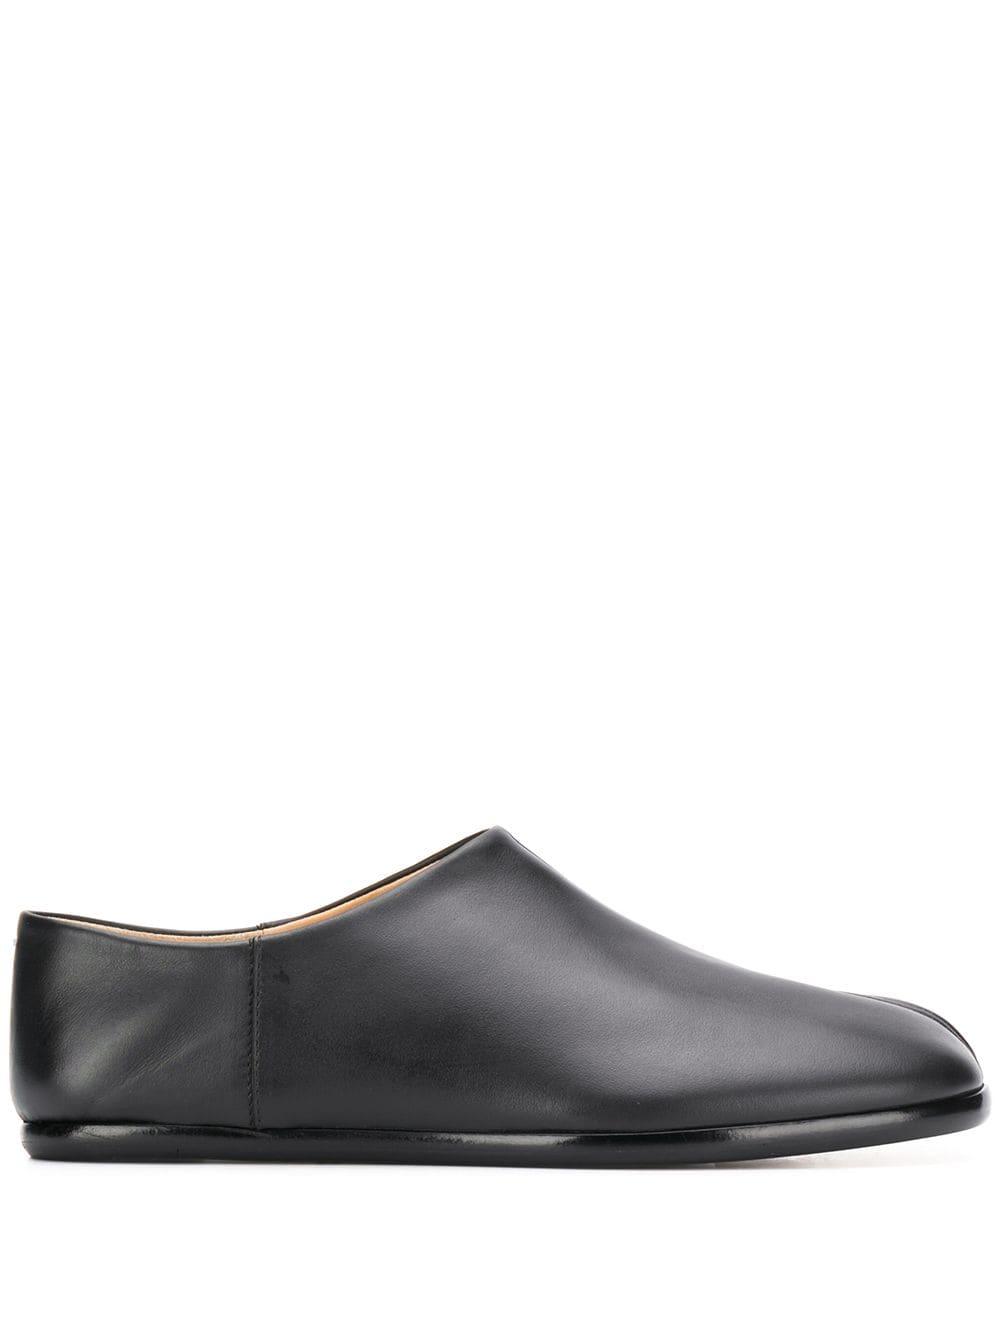 Maison Margiela Leather Tabi Slippers in Black - Save 39% - Lyst